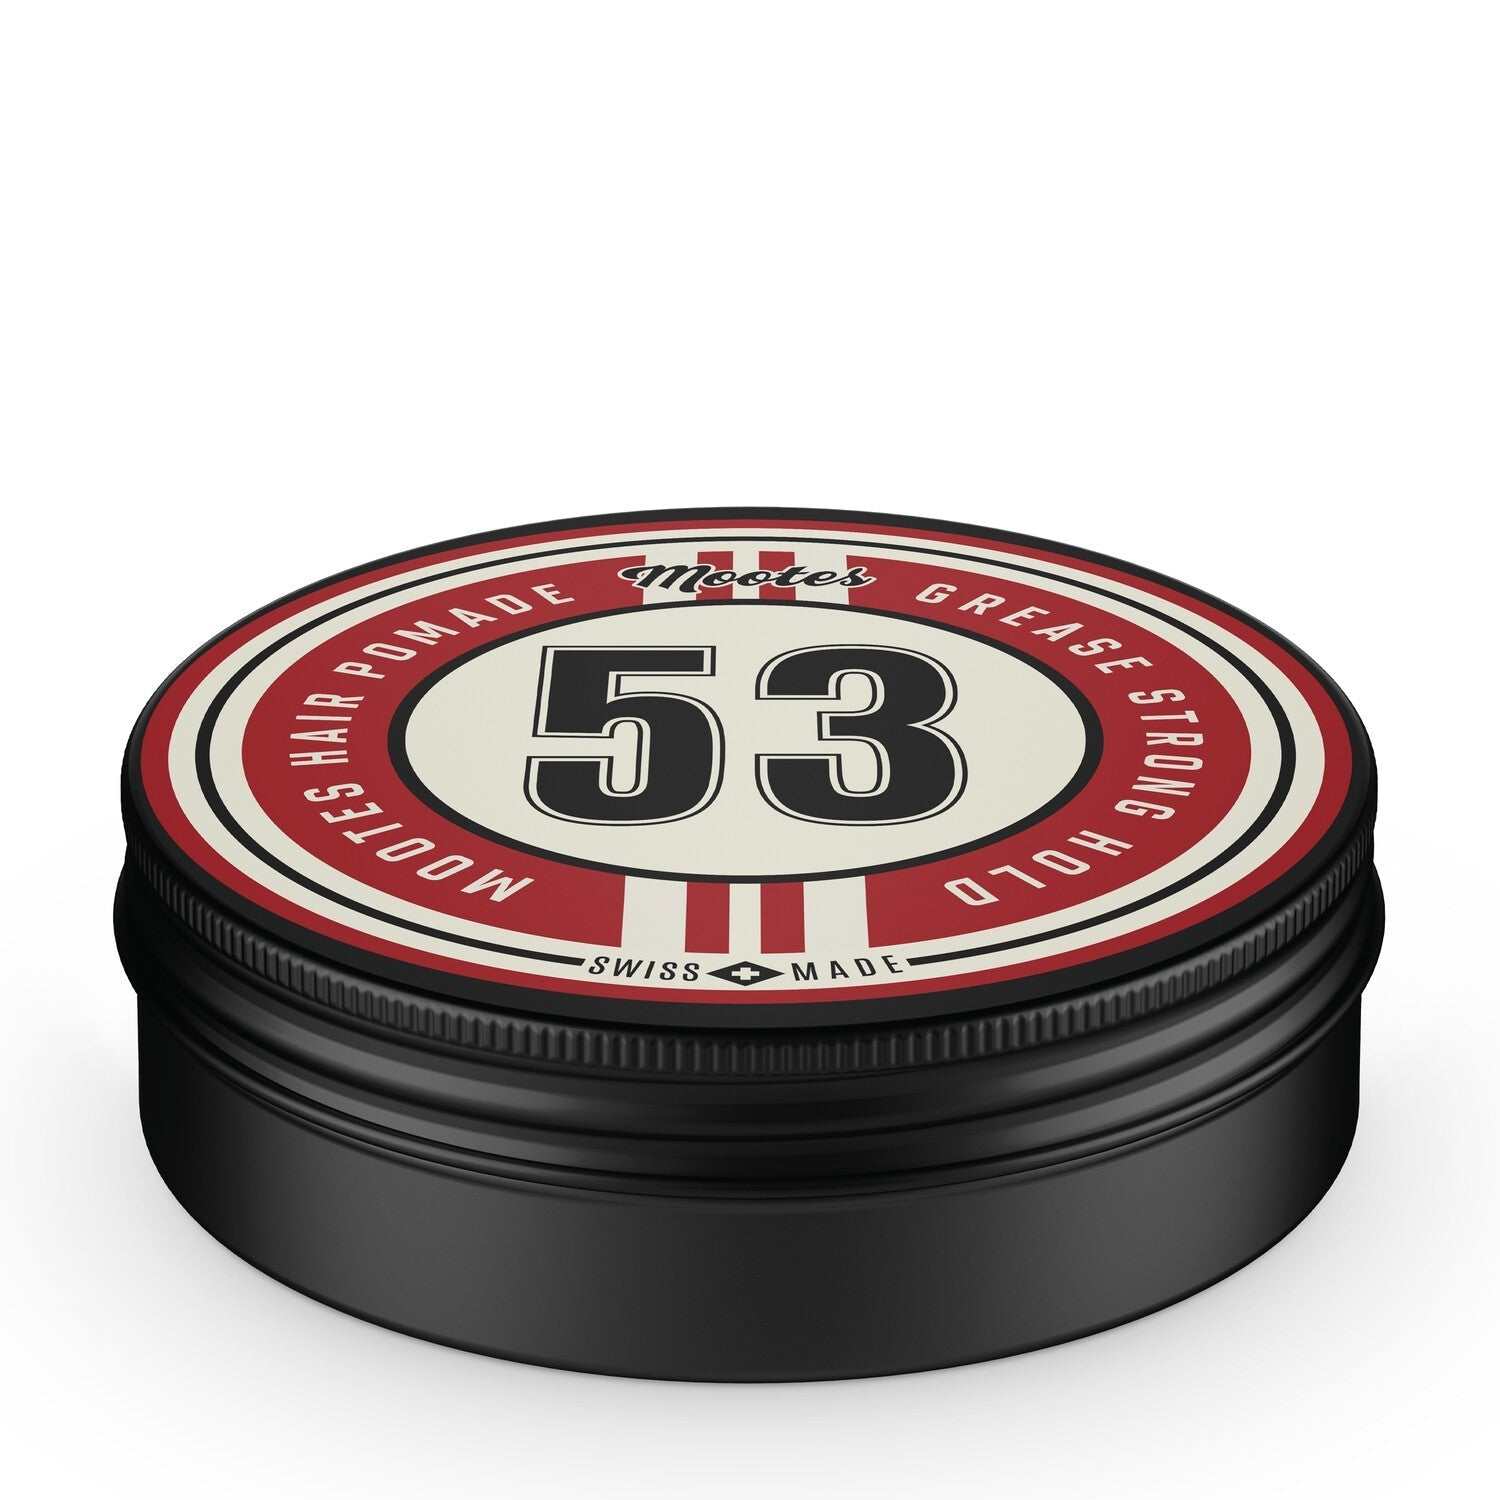 Haarpomade #53 Grease Strong Hold - Mootes